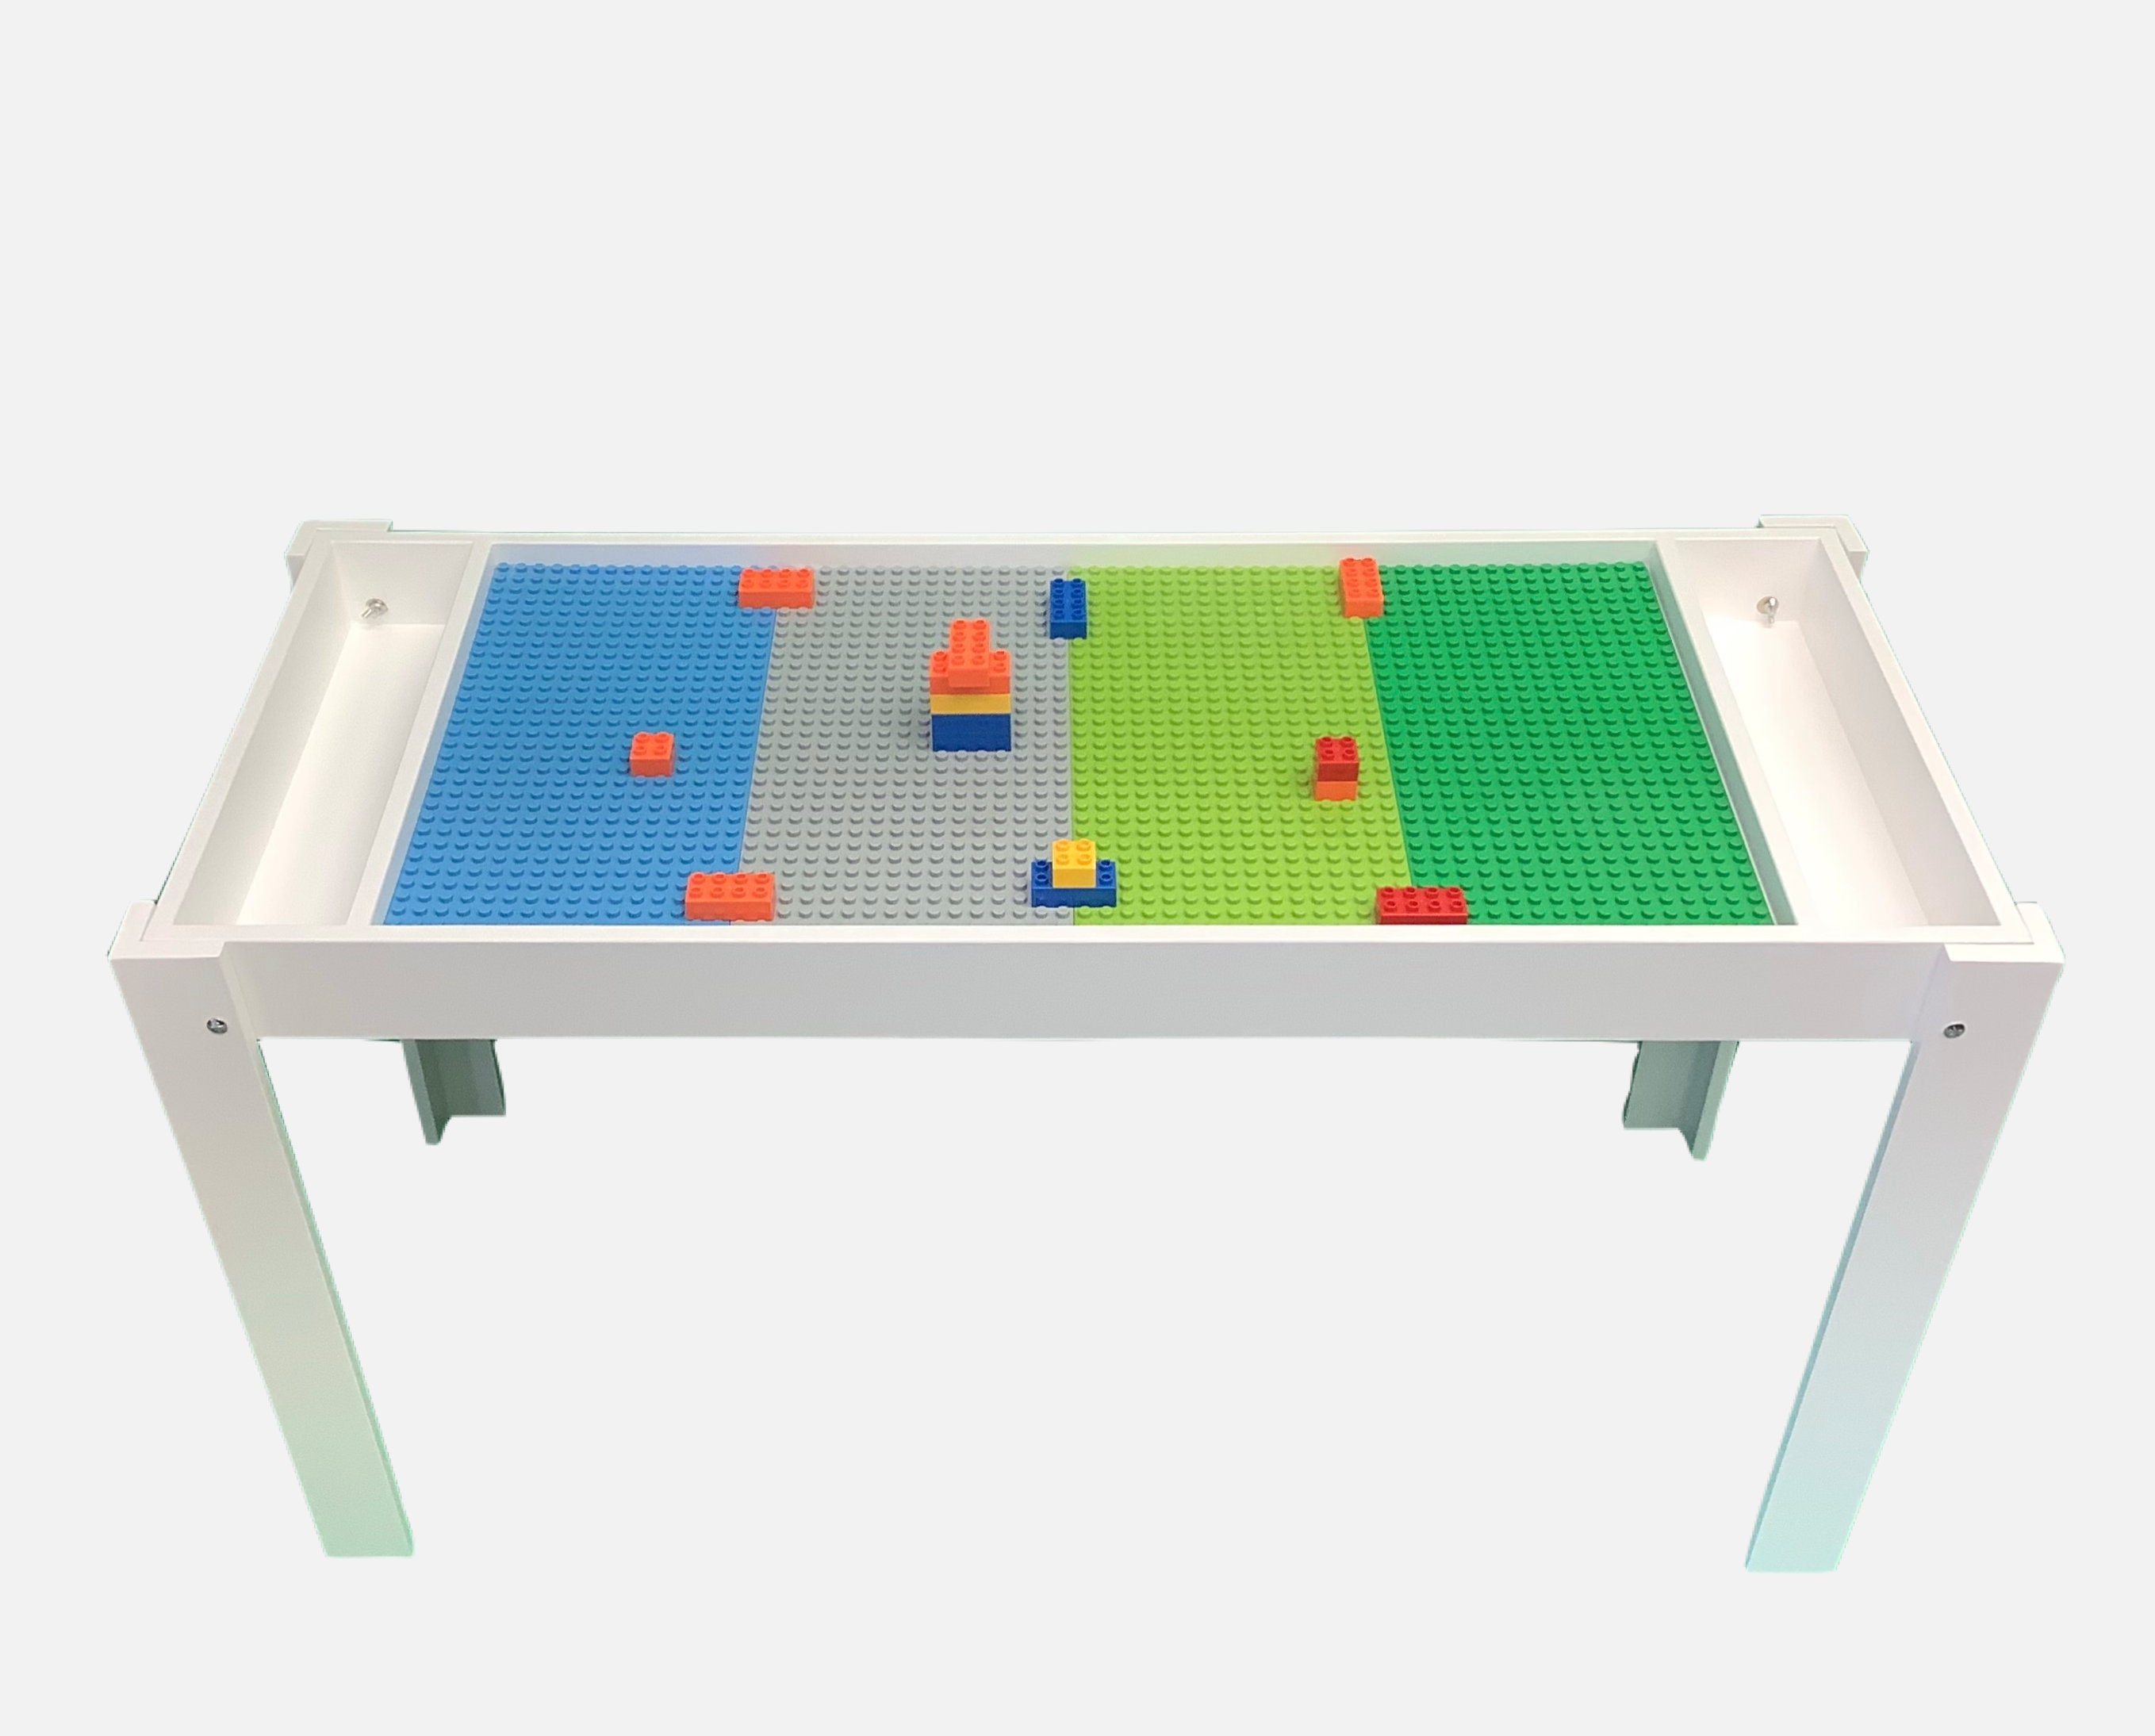  Renga Bricks Kids 2 in 1 Play Table and 2 Chair Set with  Storage, Compatible with Lego and Duplo Bricks, Activity Table Playset  Furniture with Modern White Color : Home & Kitchen